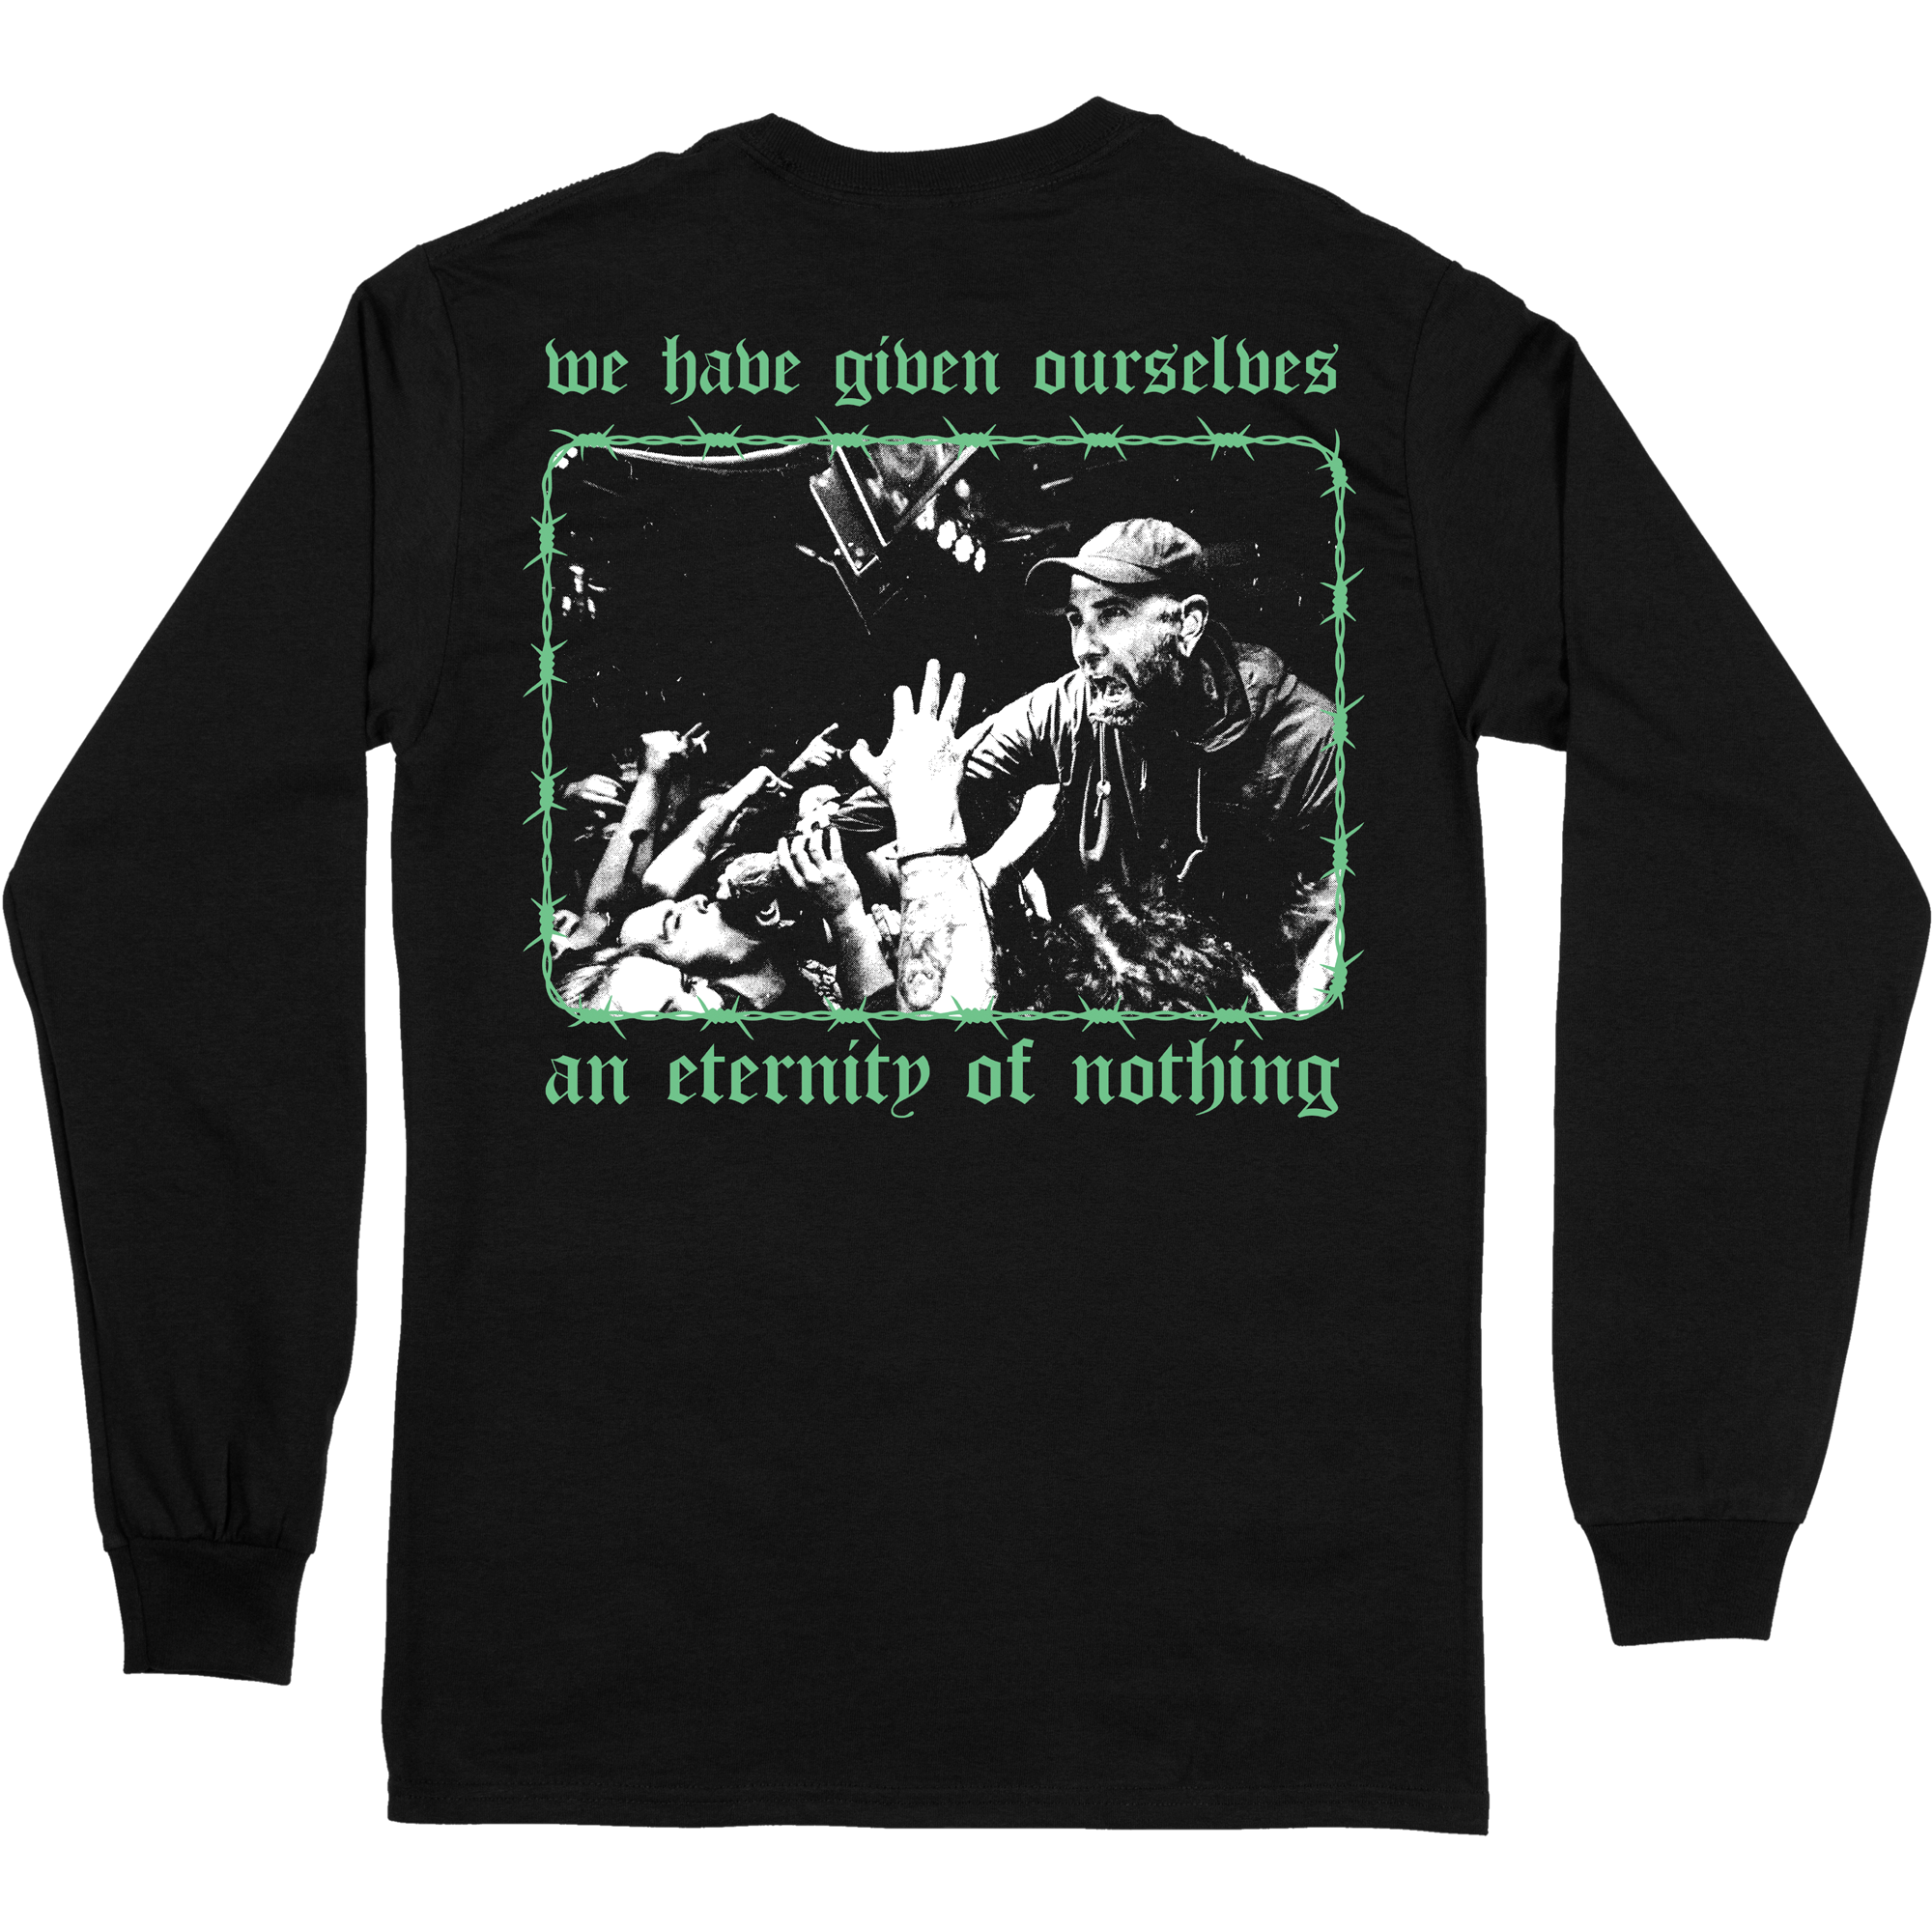 The Acacia Strain - An Eternity of Nothing Long Sleeve - Black